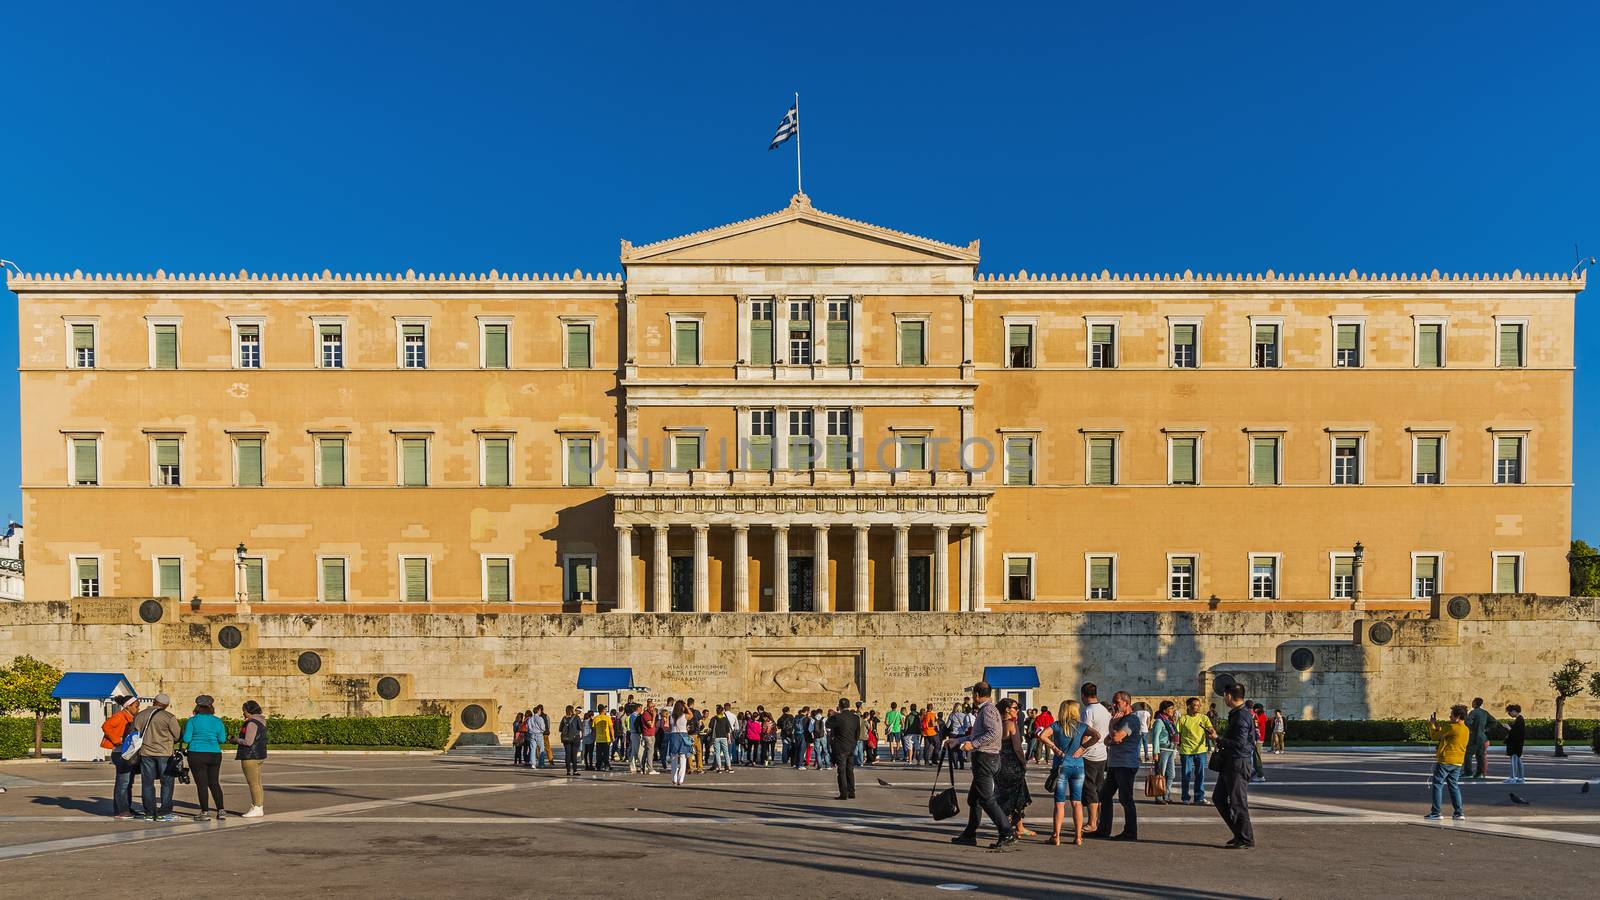 The Presidential Mansion in Athens, the official residence of the President of the Hellenic Republic. Designed by Ernst Ziller, built in a neoclassical style in the years 1891-1897.